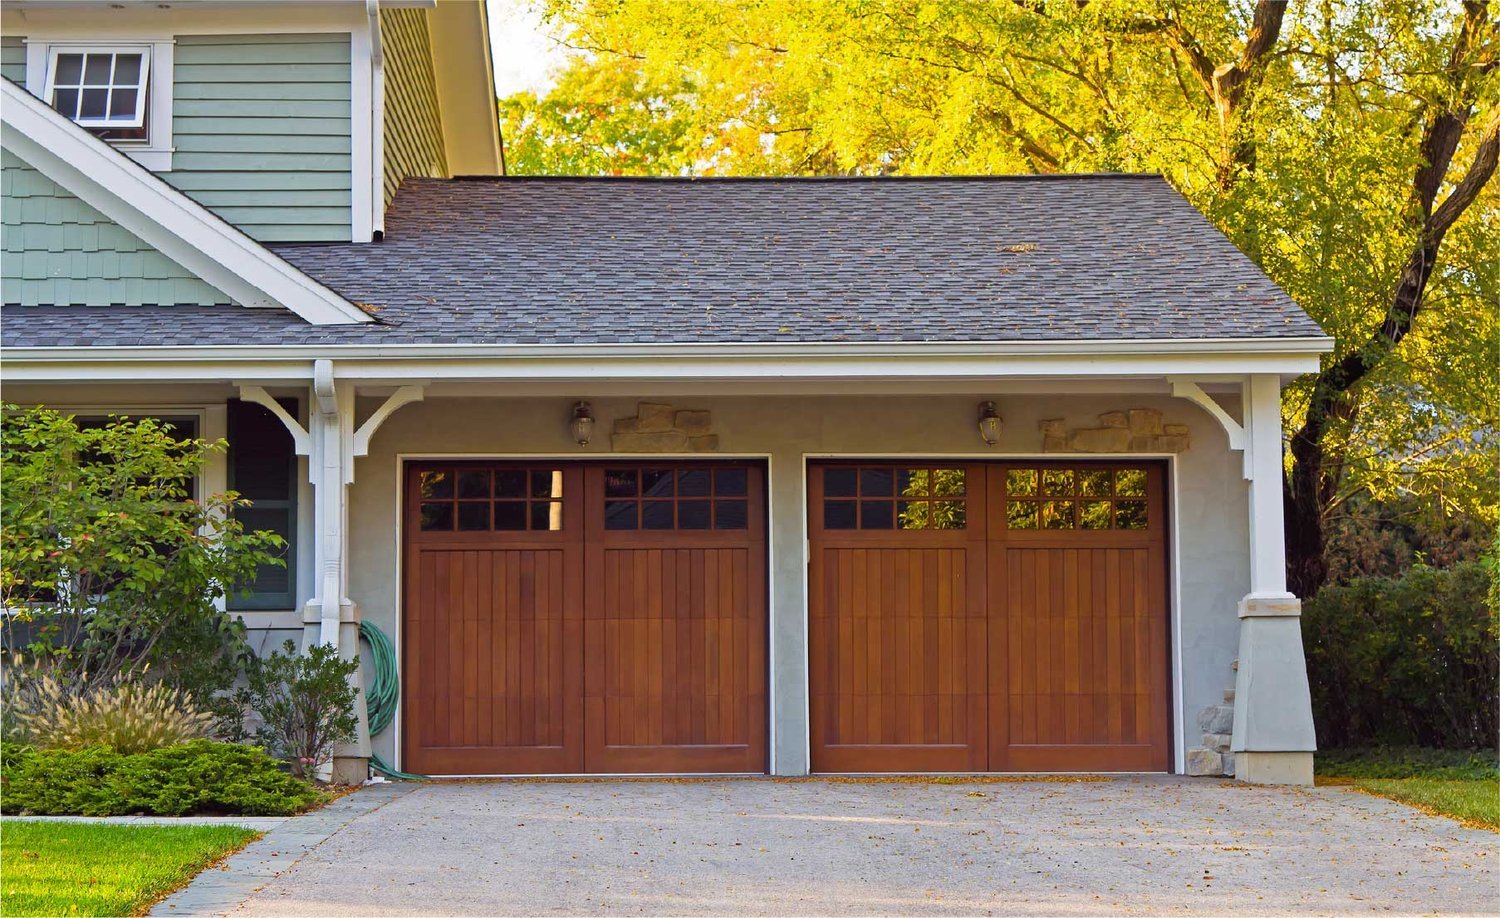 New Jersey Homeowner Comes Up With Their Own Small Garage Storage Ideas 